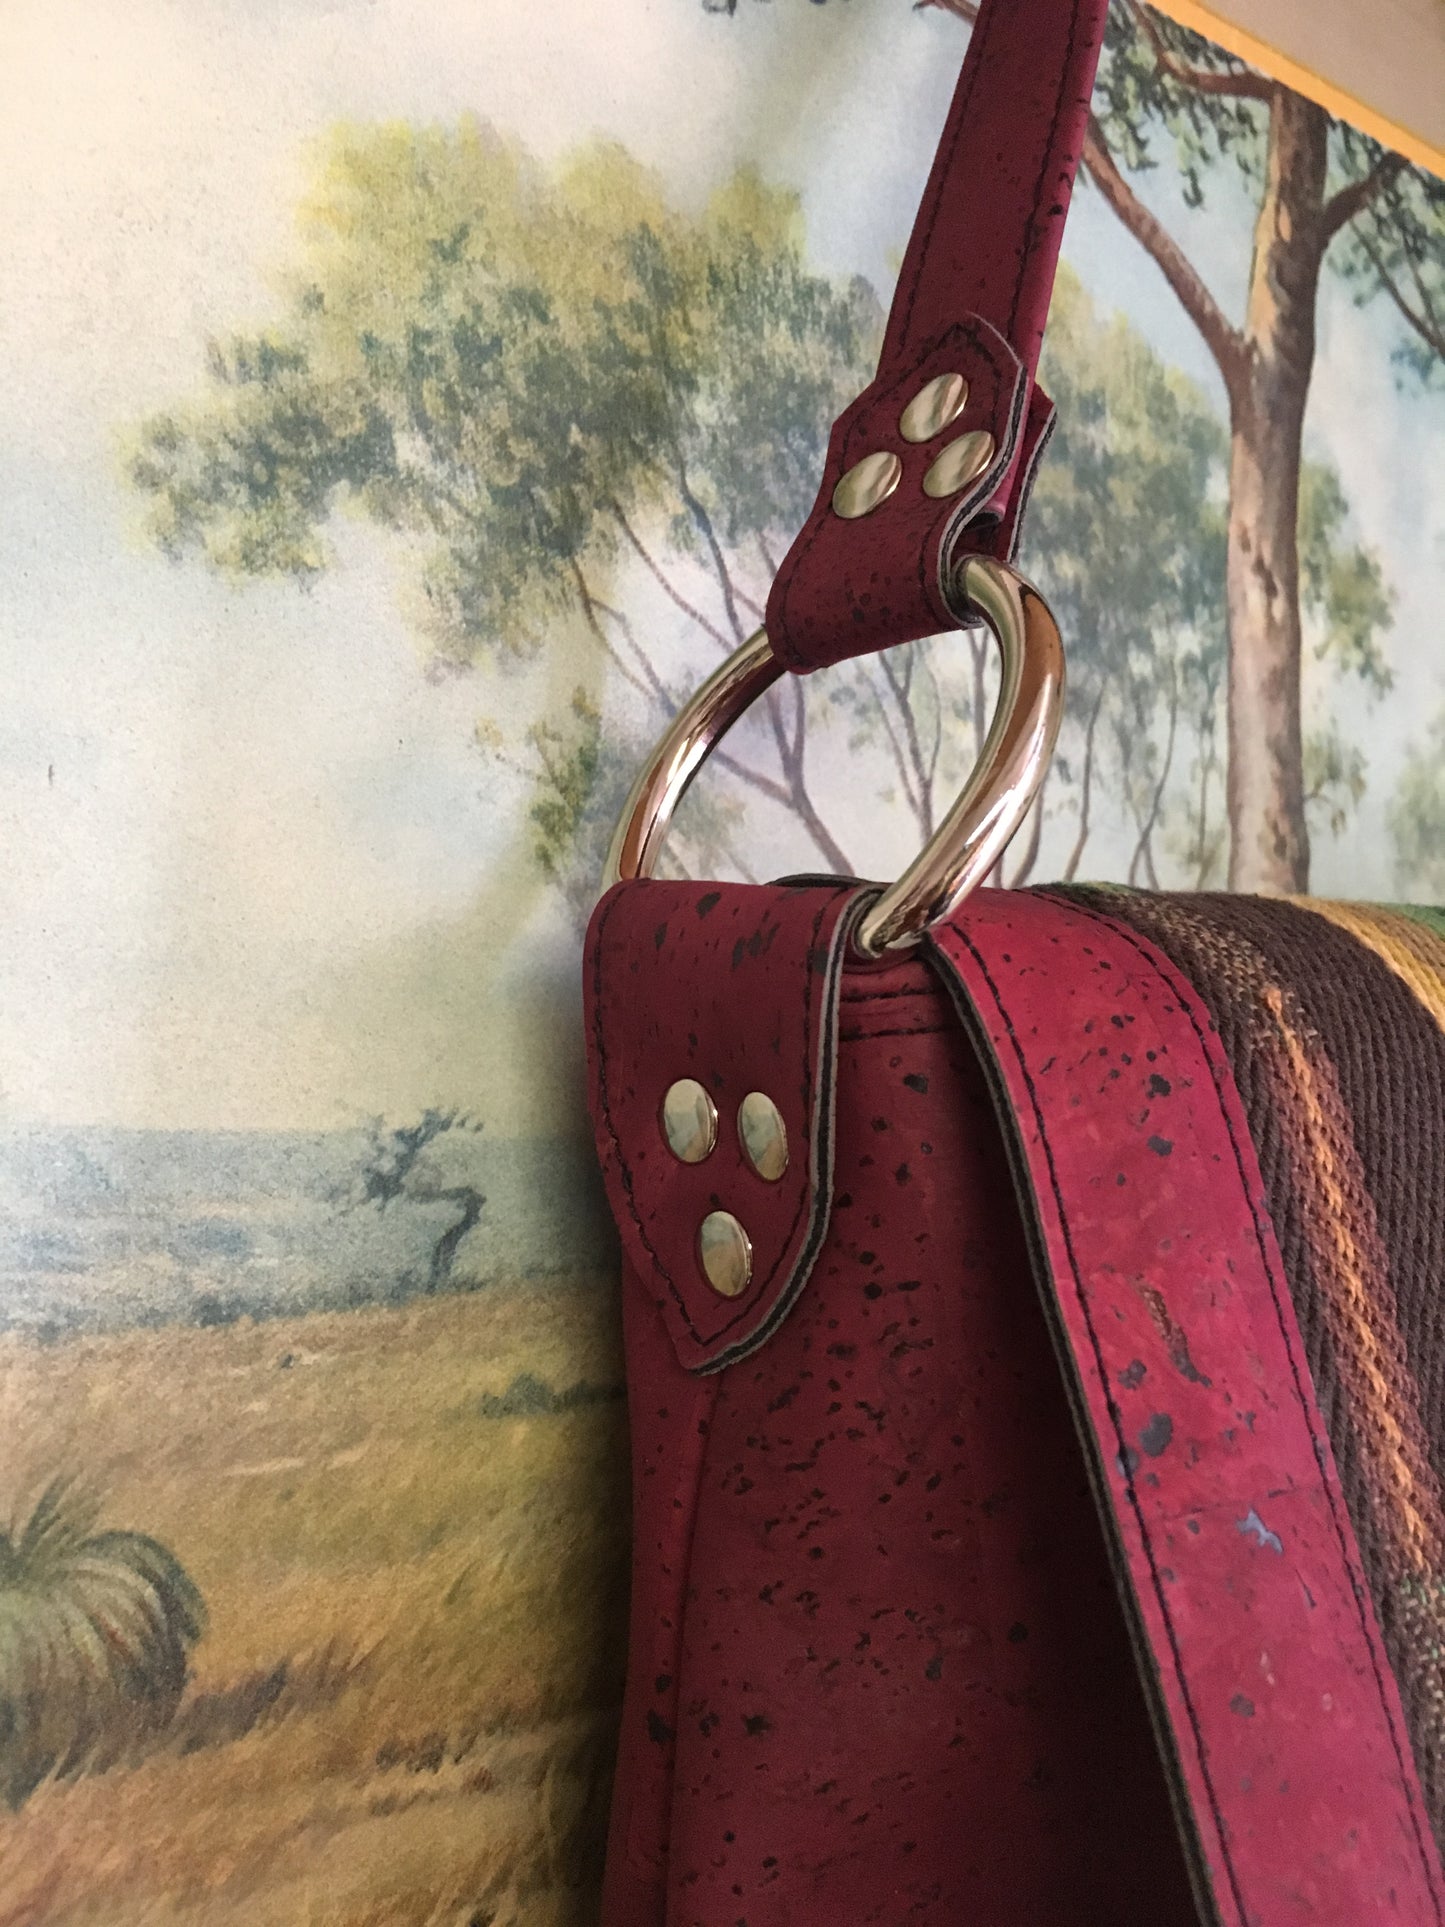 Fringe Saddle Bag in Genuine Sustainable Wine Colored Cork with Chocolate Serape Fabric with 24” (61cm) shoulder strap, magnetic closure, inside open divided pocket and zipper pocket with J.T. Christensen Designs Signature Label and hidden serial number. Ships from Sweden